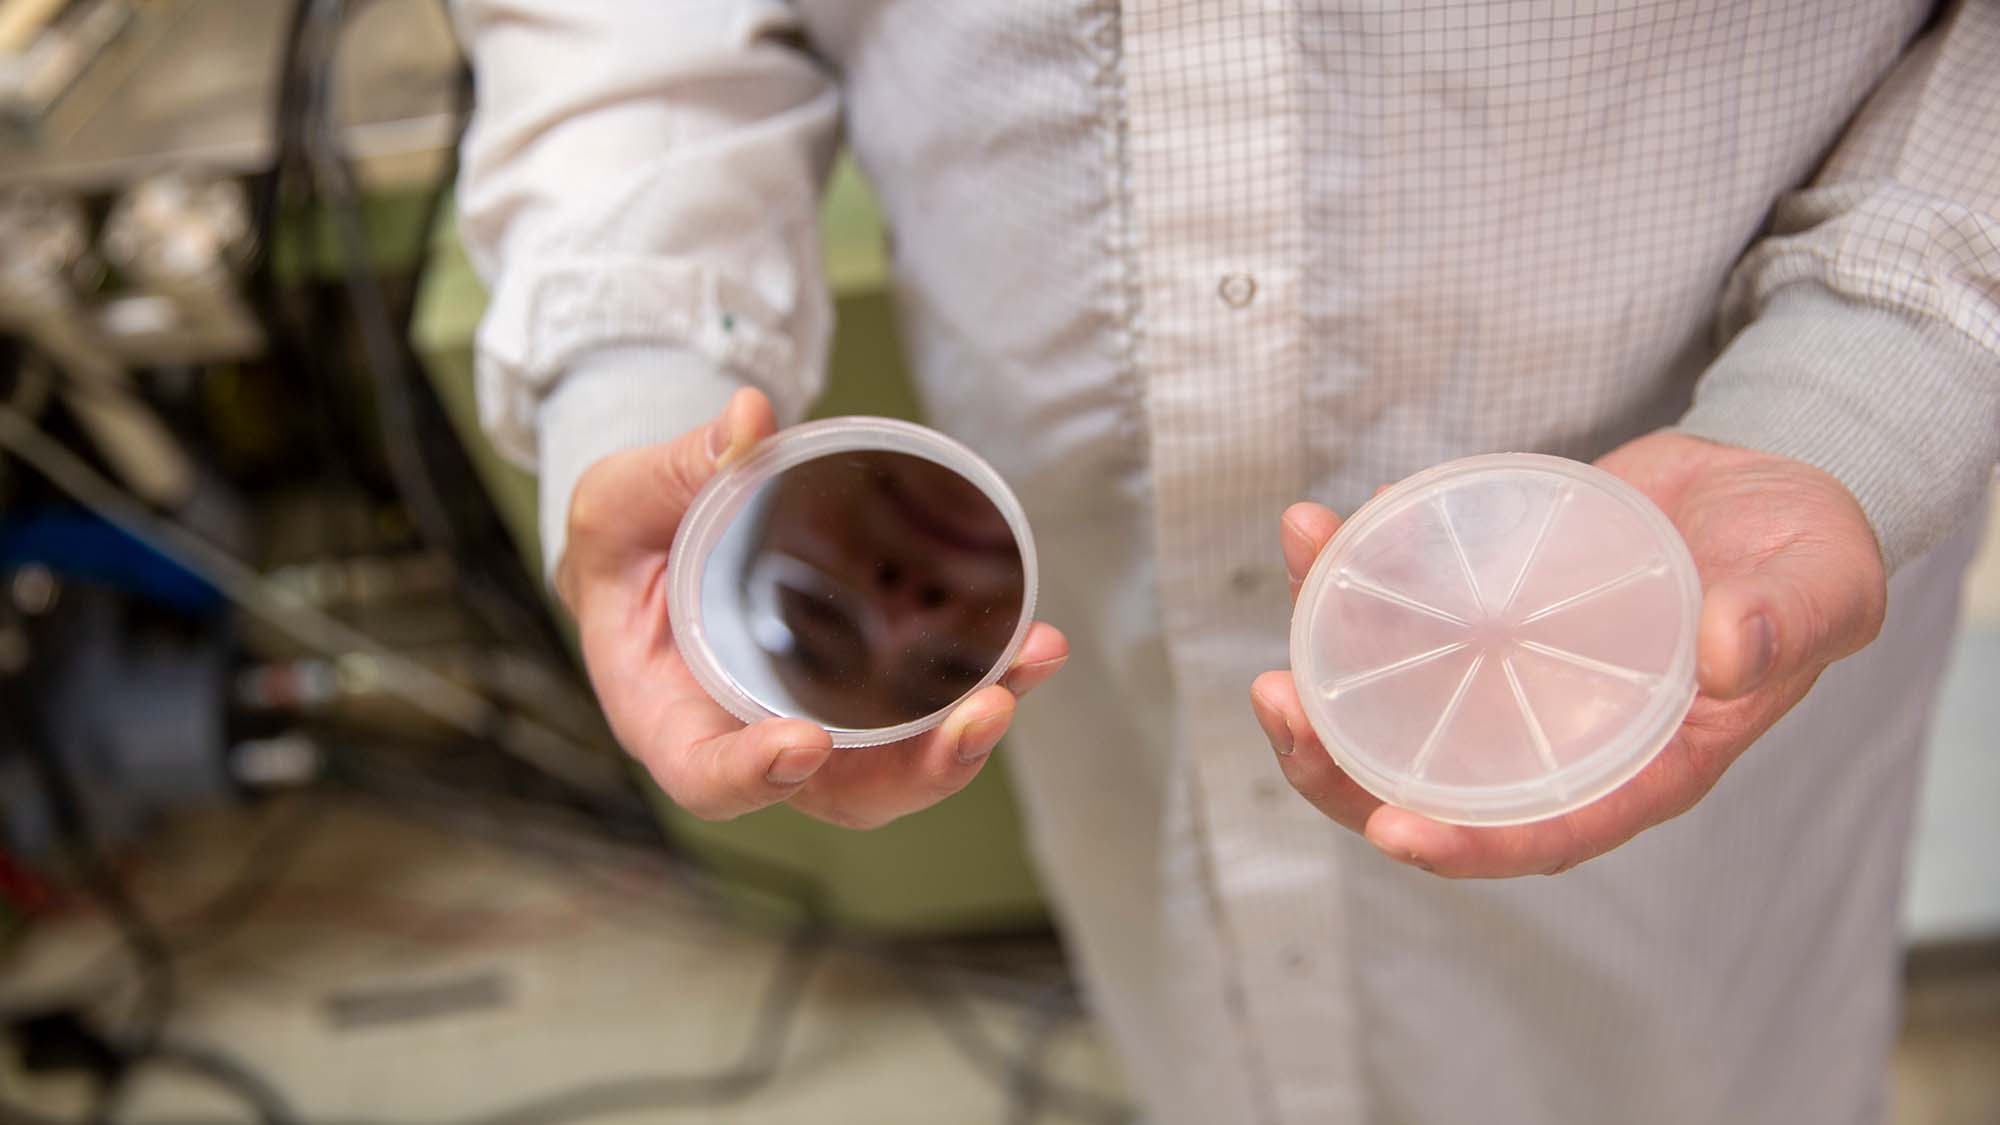 A person in a white lab coat holds two petri dishes towards the camera; one dish is covered with a reflective film and the other is segmented into sections.